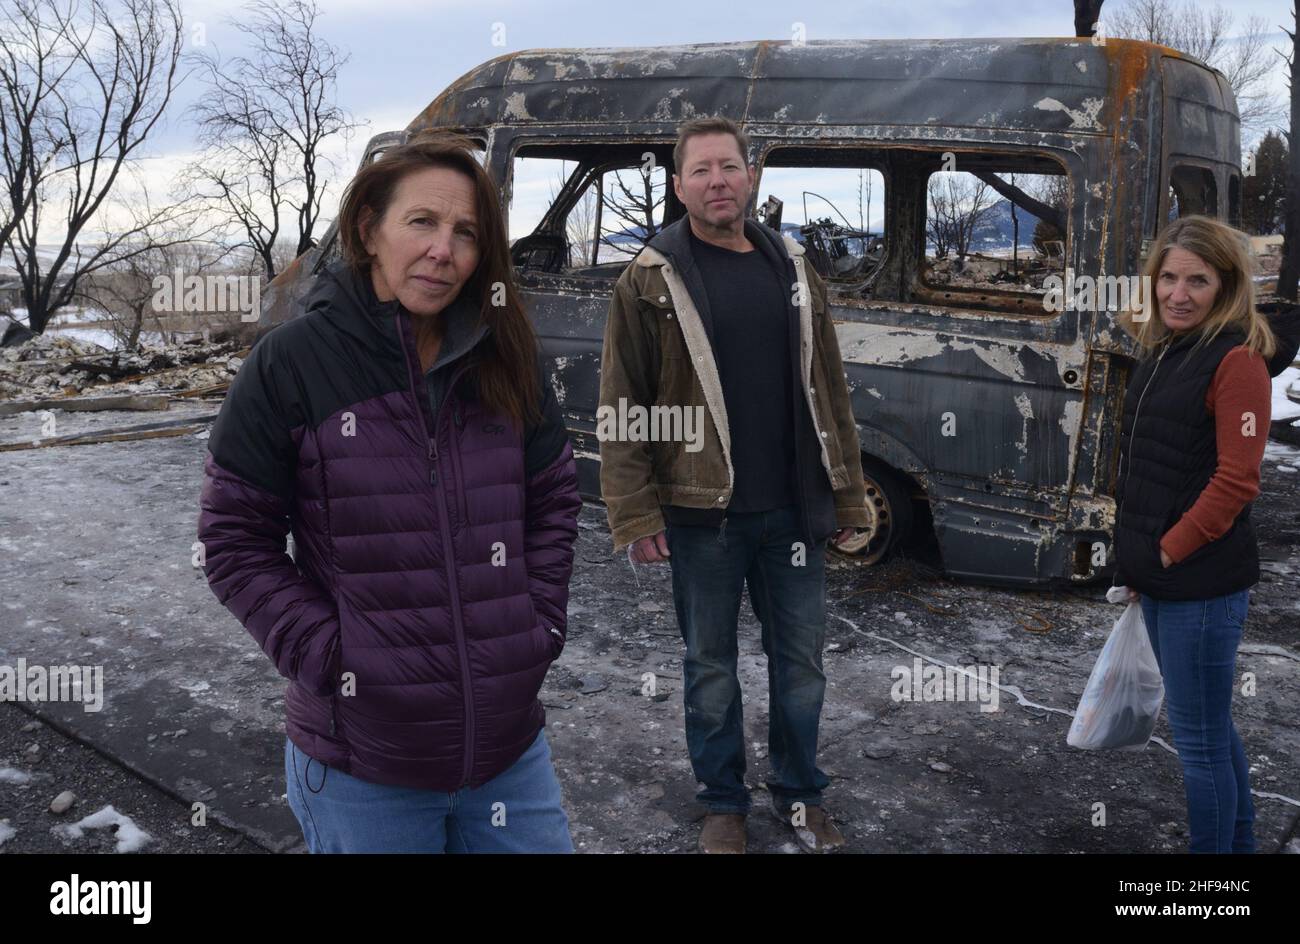 Fire victims Cheryl & Nathan Ruff, & neighbor Lisa Laguardia, in front of burned-out van in the Ruff's former garage. Laguardia also lost her home. Stock Photo